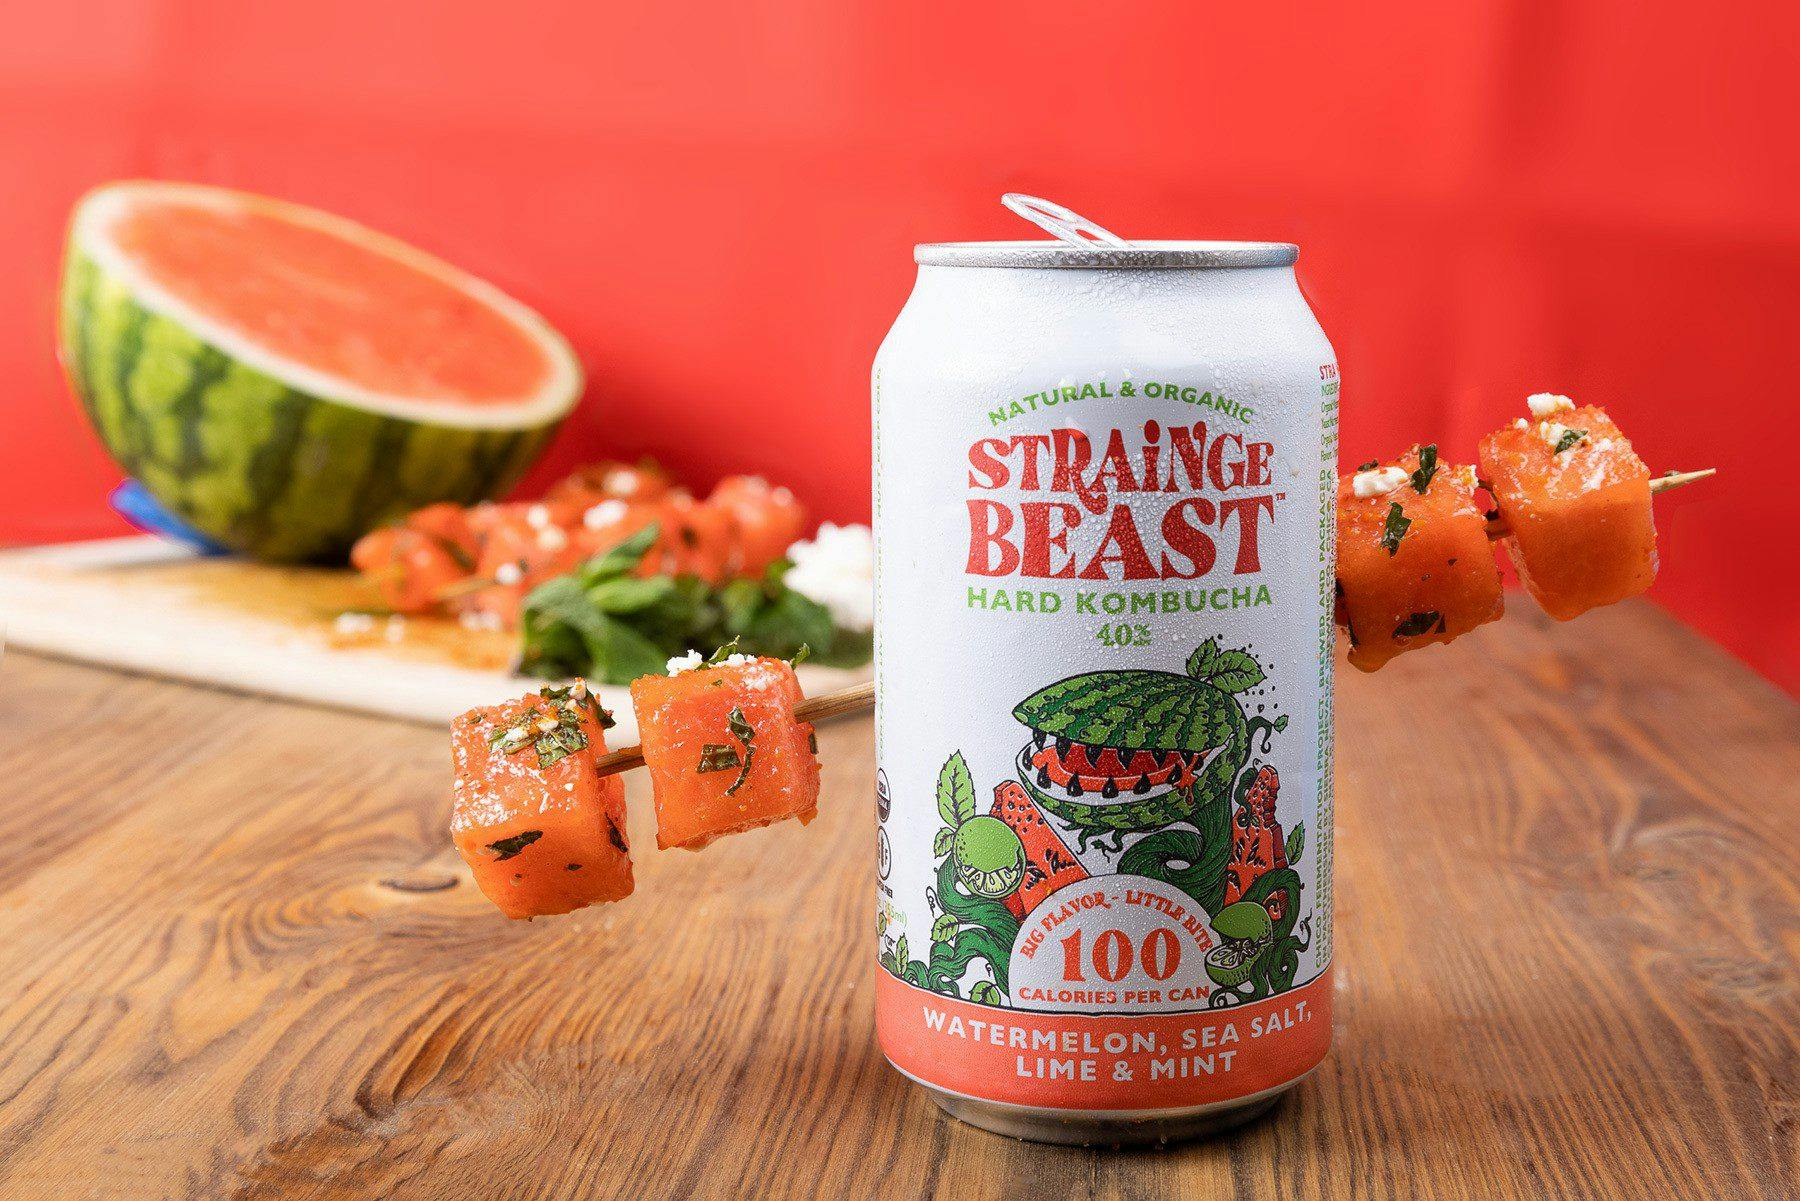 A can of Strainge Beast pierced with a watermelon skewer